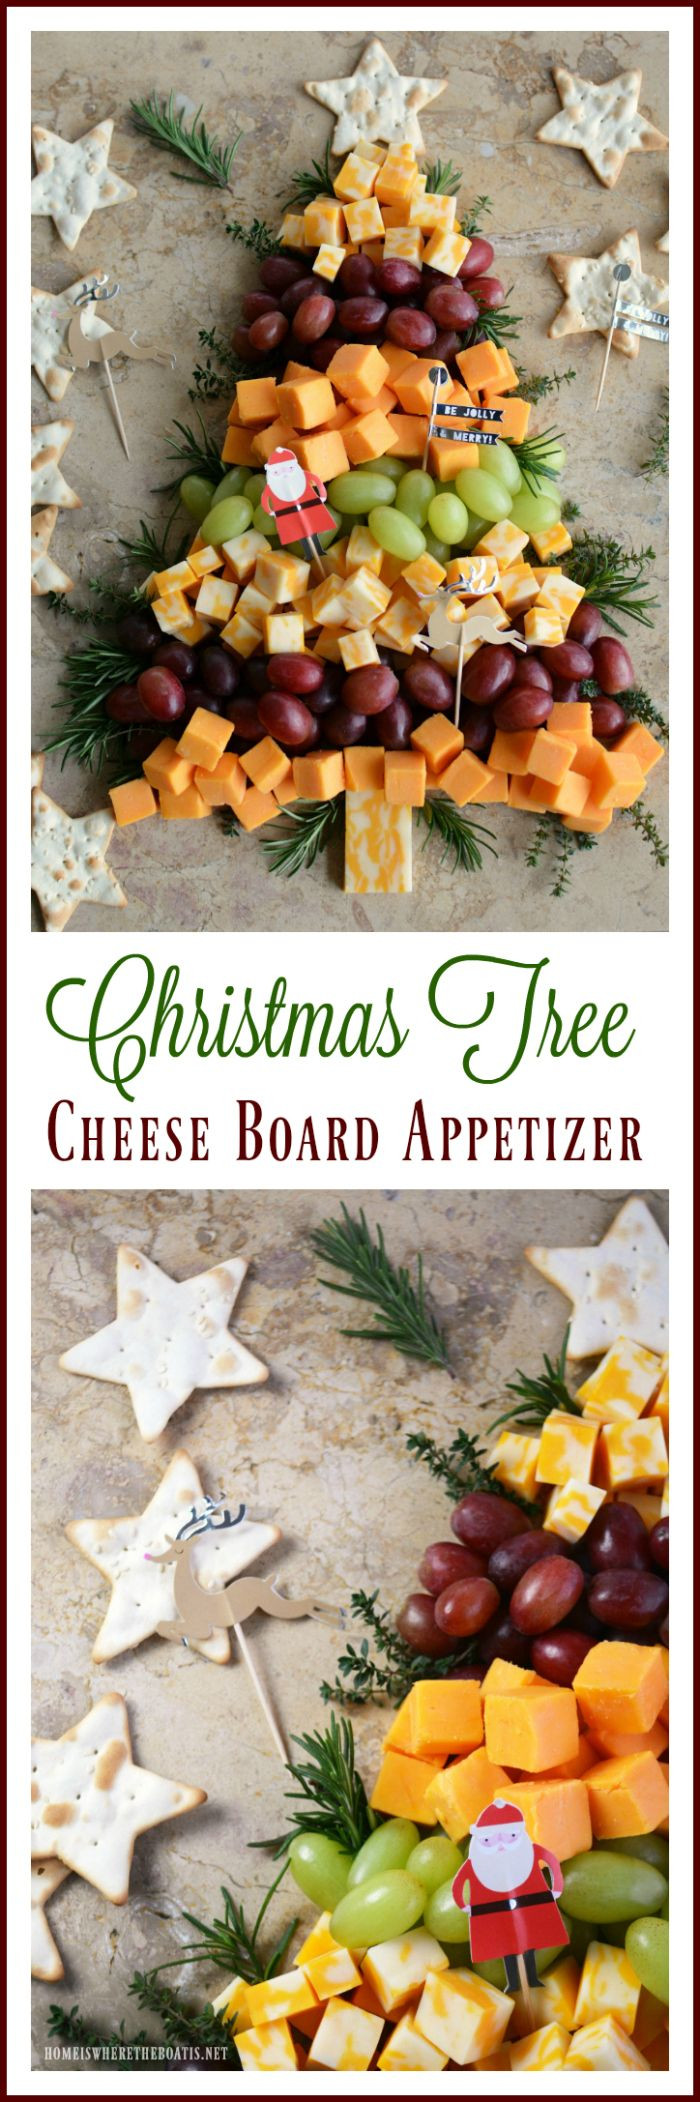 Christmas Party Appetizers Pinterest
 25 best ideas about Christmas appetizers on Pinterest